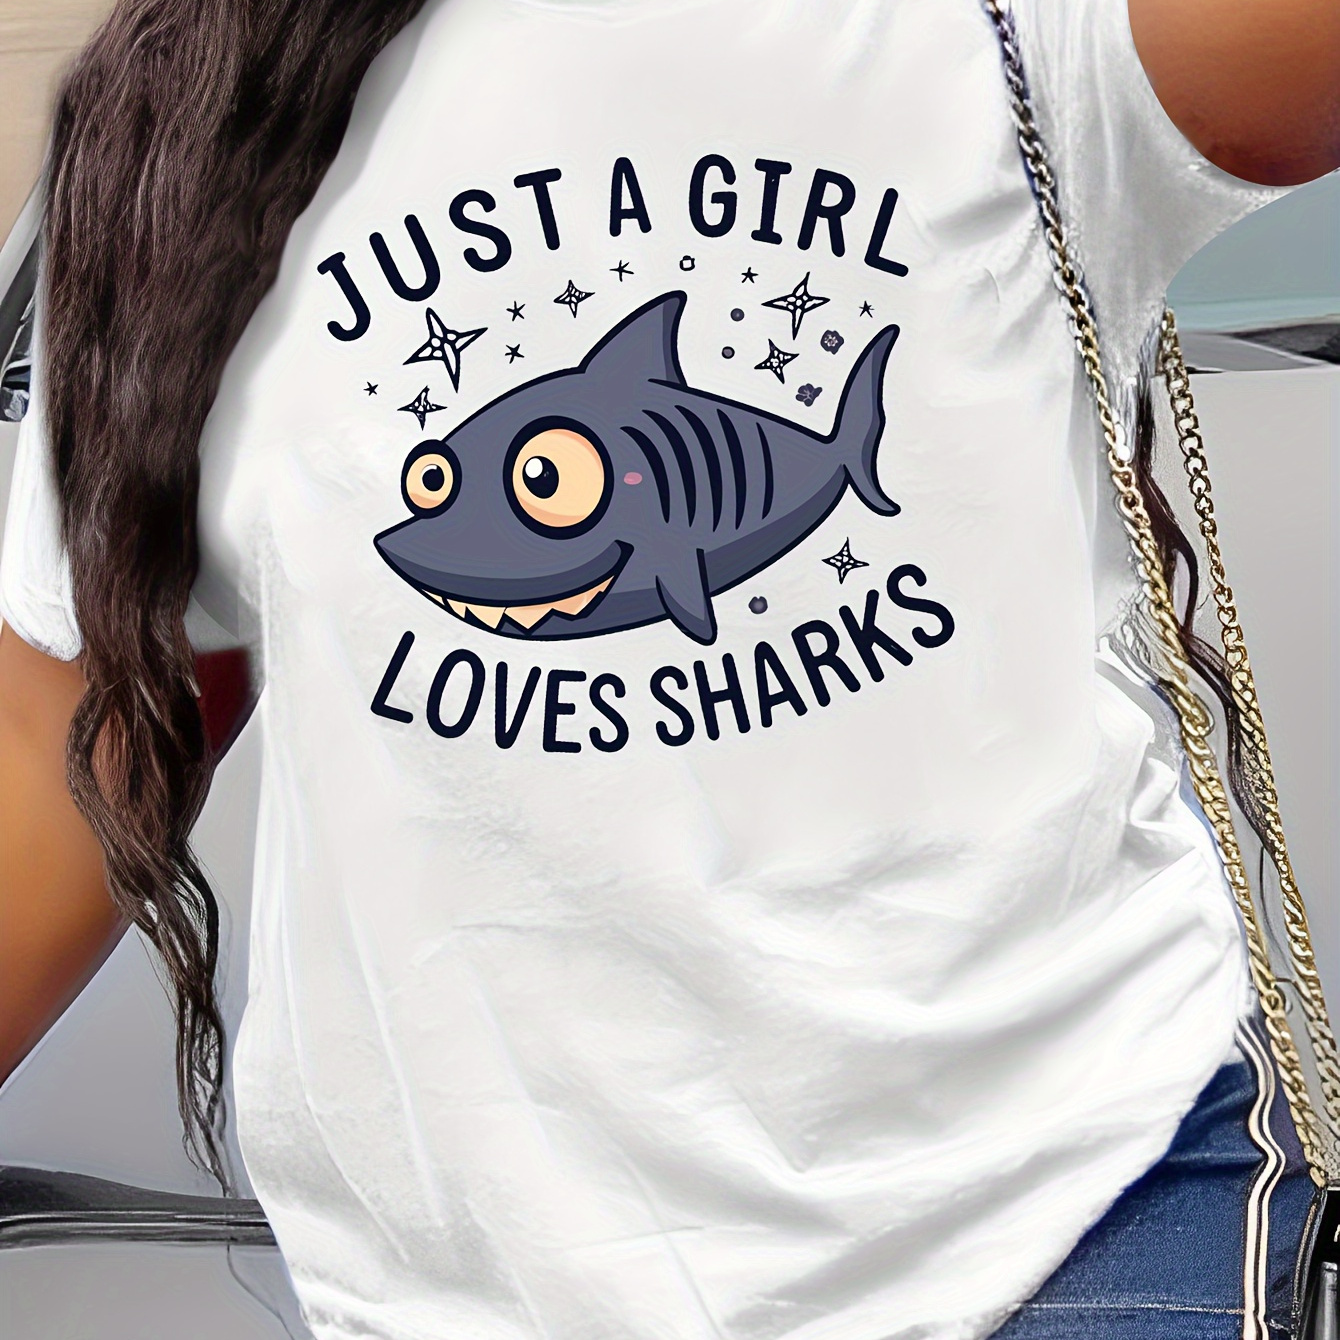 

Just A Girl Who Loves Sharks Print T-shirt, Short Sleeve Crew Neck Casual Top For Summer & Spring, Women's Clothing